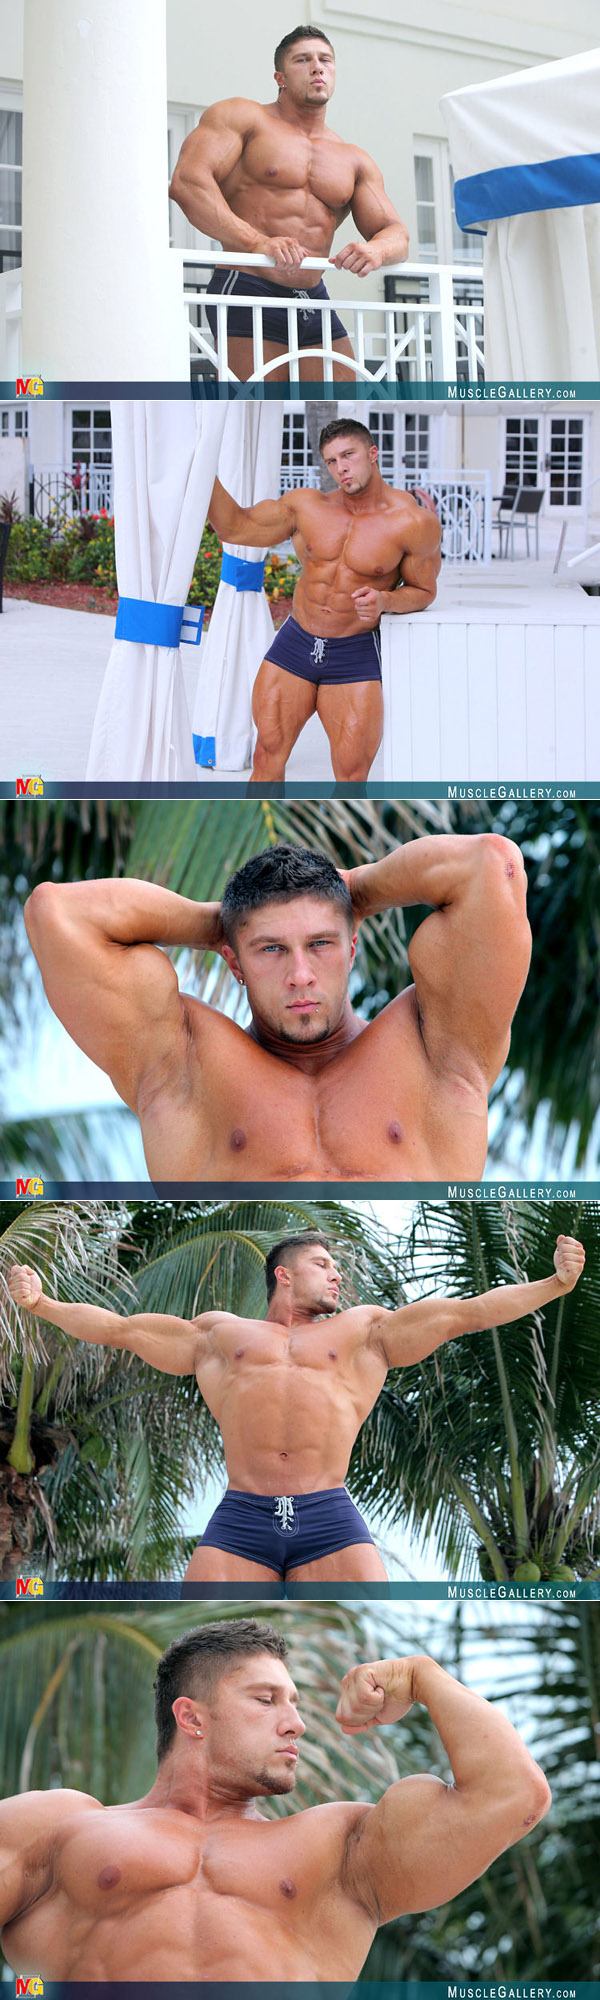 Hot muscle man outdoors